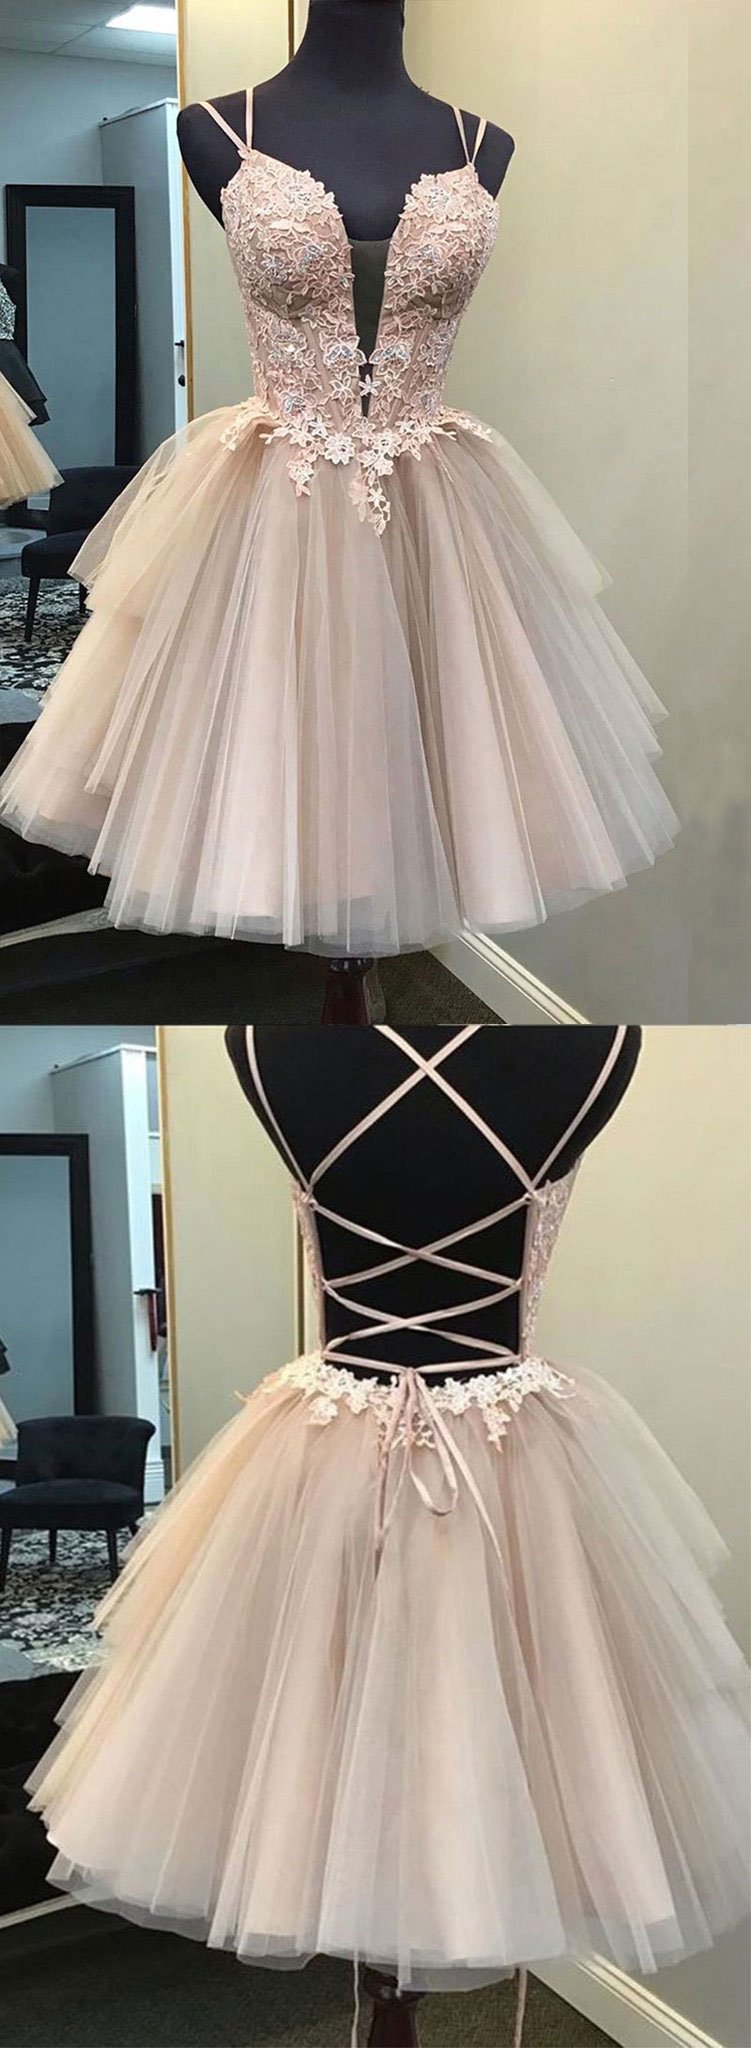 Sweet Cute Short Homecoming Dresses Deep V-neck Spaghetti Strap Lace Applique Ruffles Tulle Ball Gown Women Prom Party Gowns